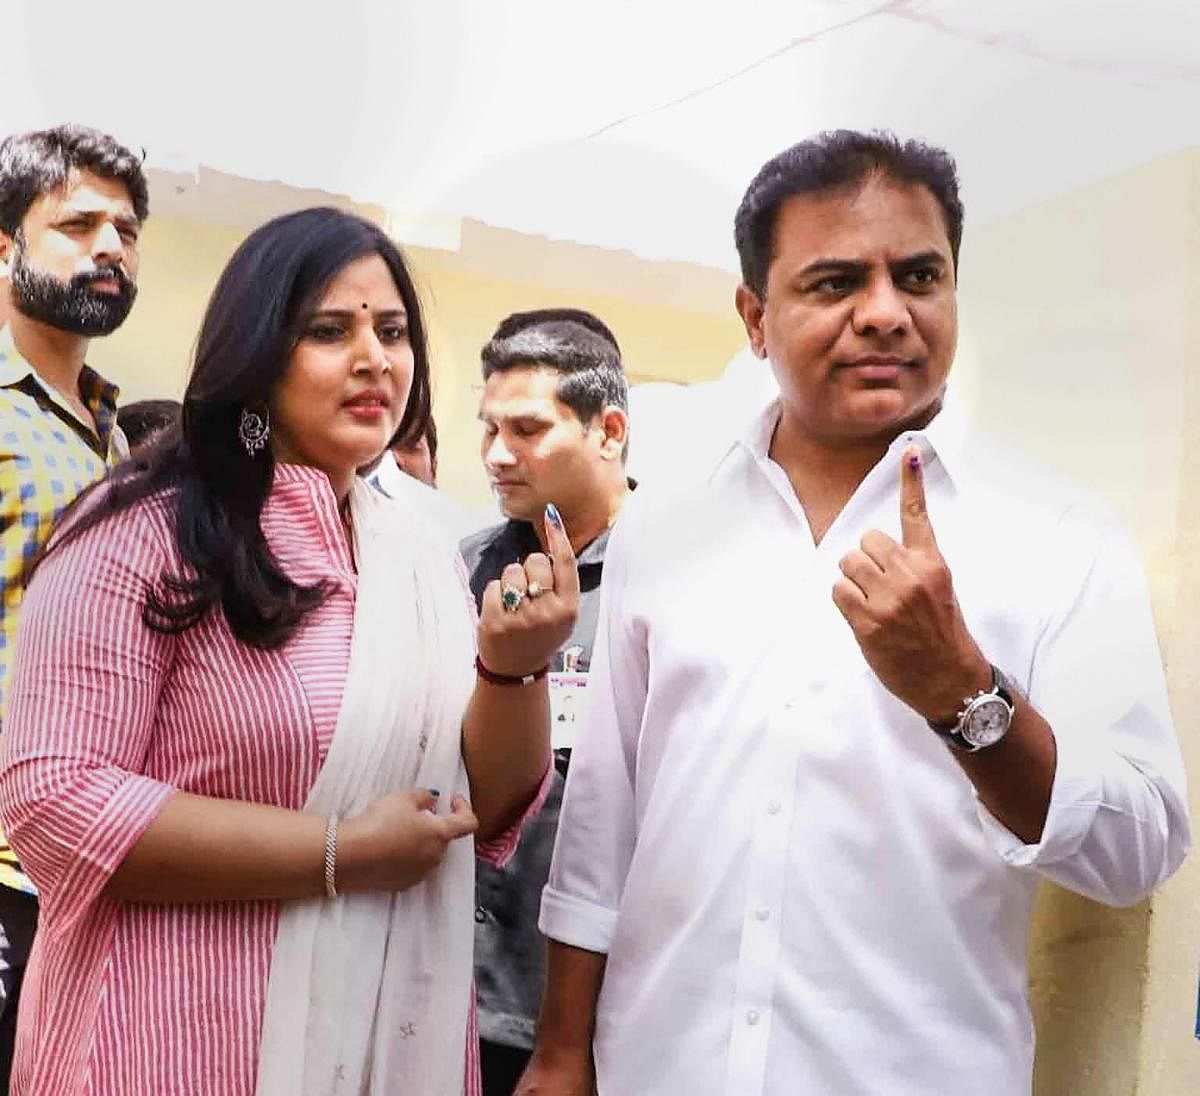 KTR, who strategized party plans, selection of candidates, and led the campaigning, has through a tweet thanked Telangana people for reposing faith in CM KCR and termed the result as “no mean feat.” (PTI Photo)